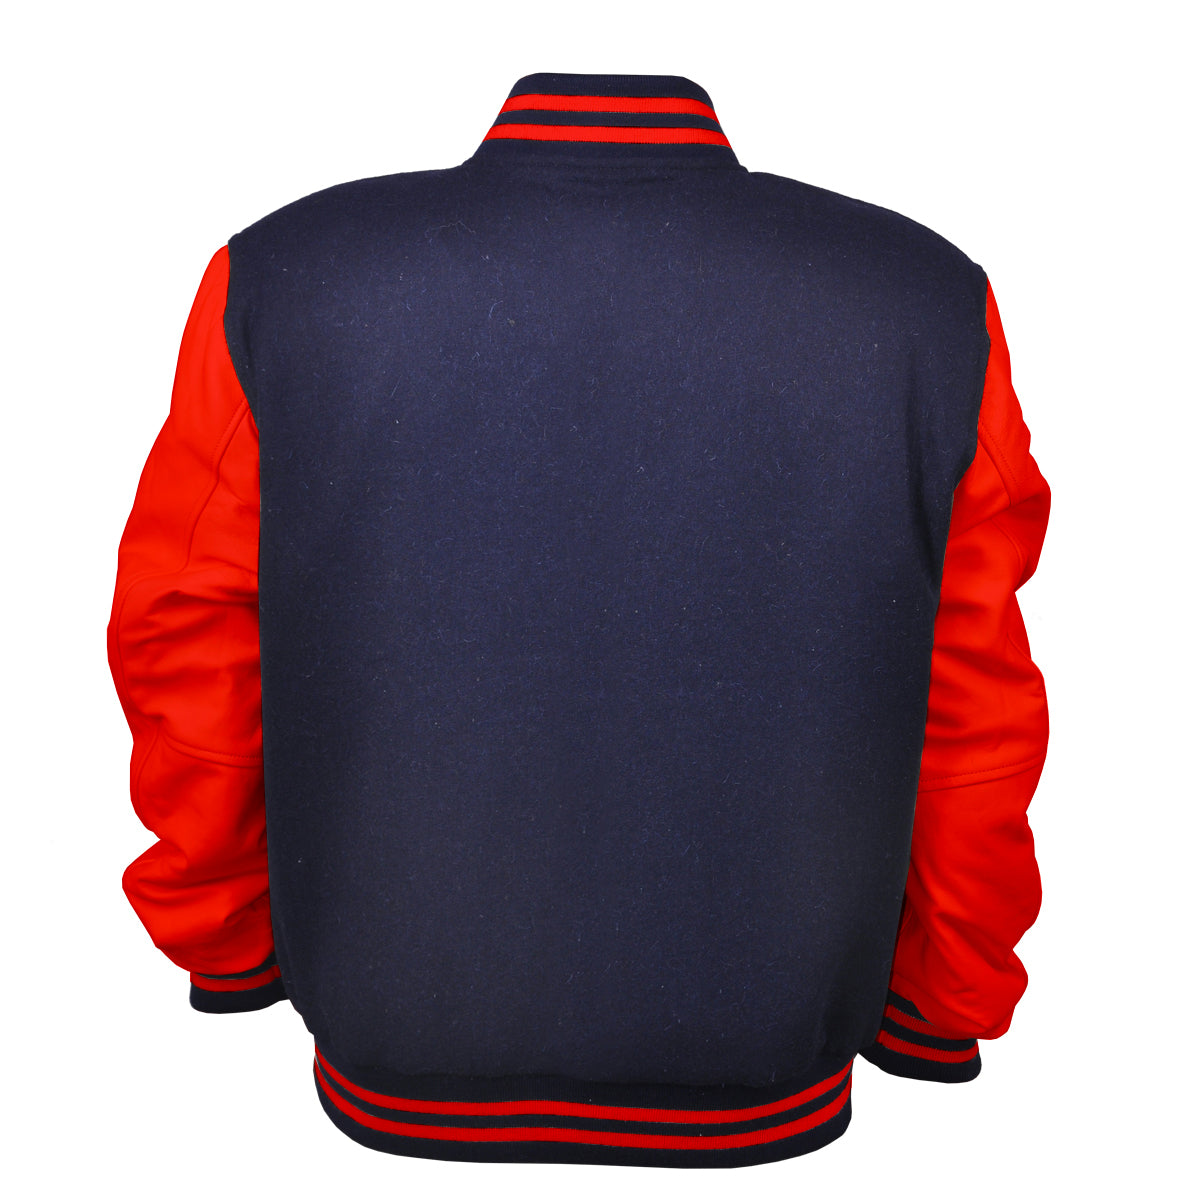 Woman Jacket Wool+Leather Navy Blue/Red